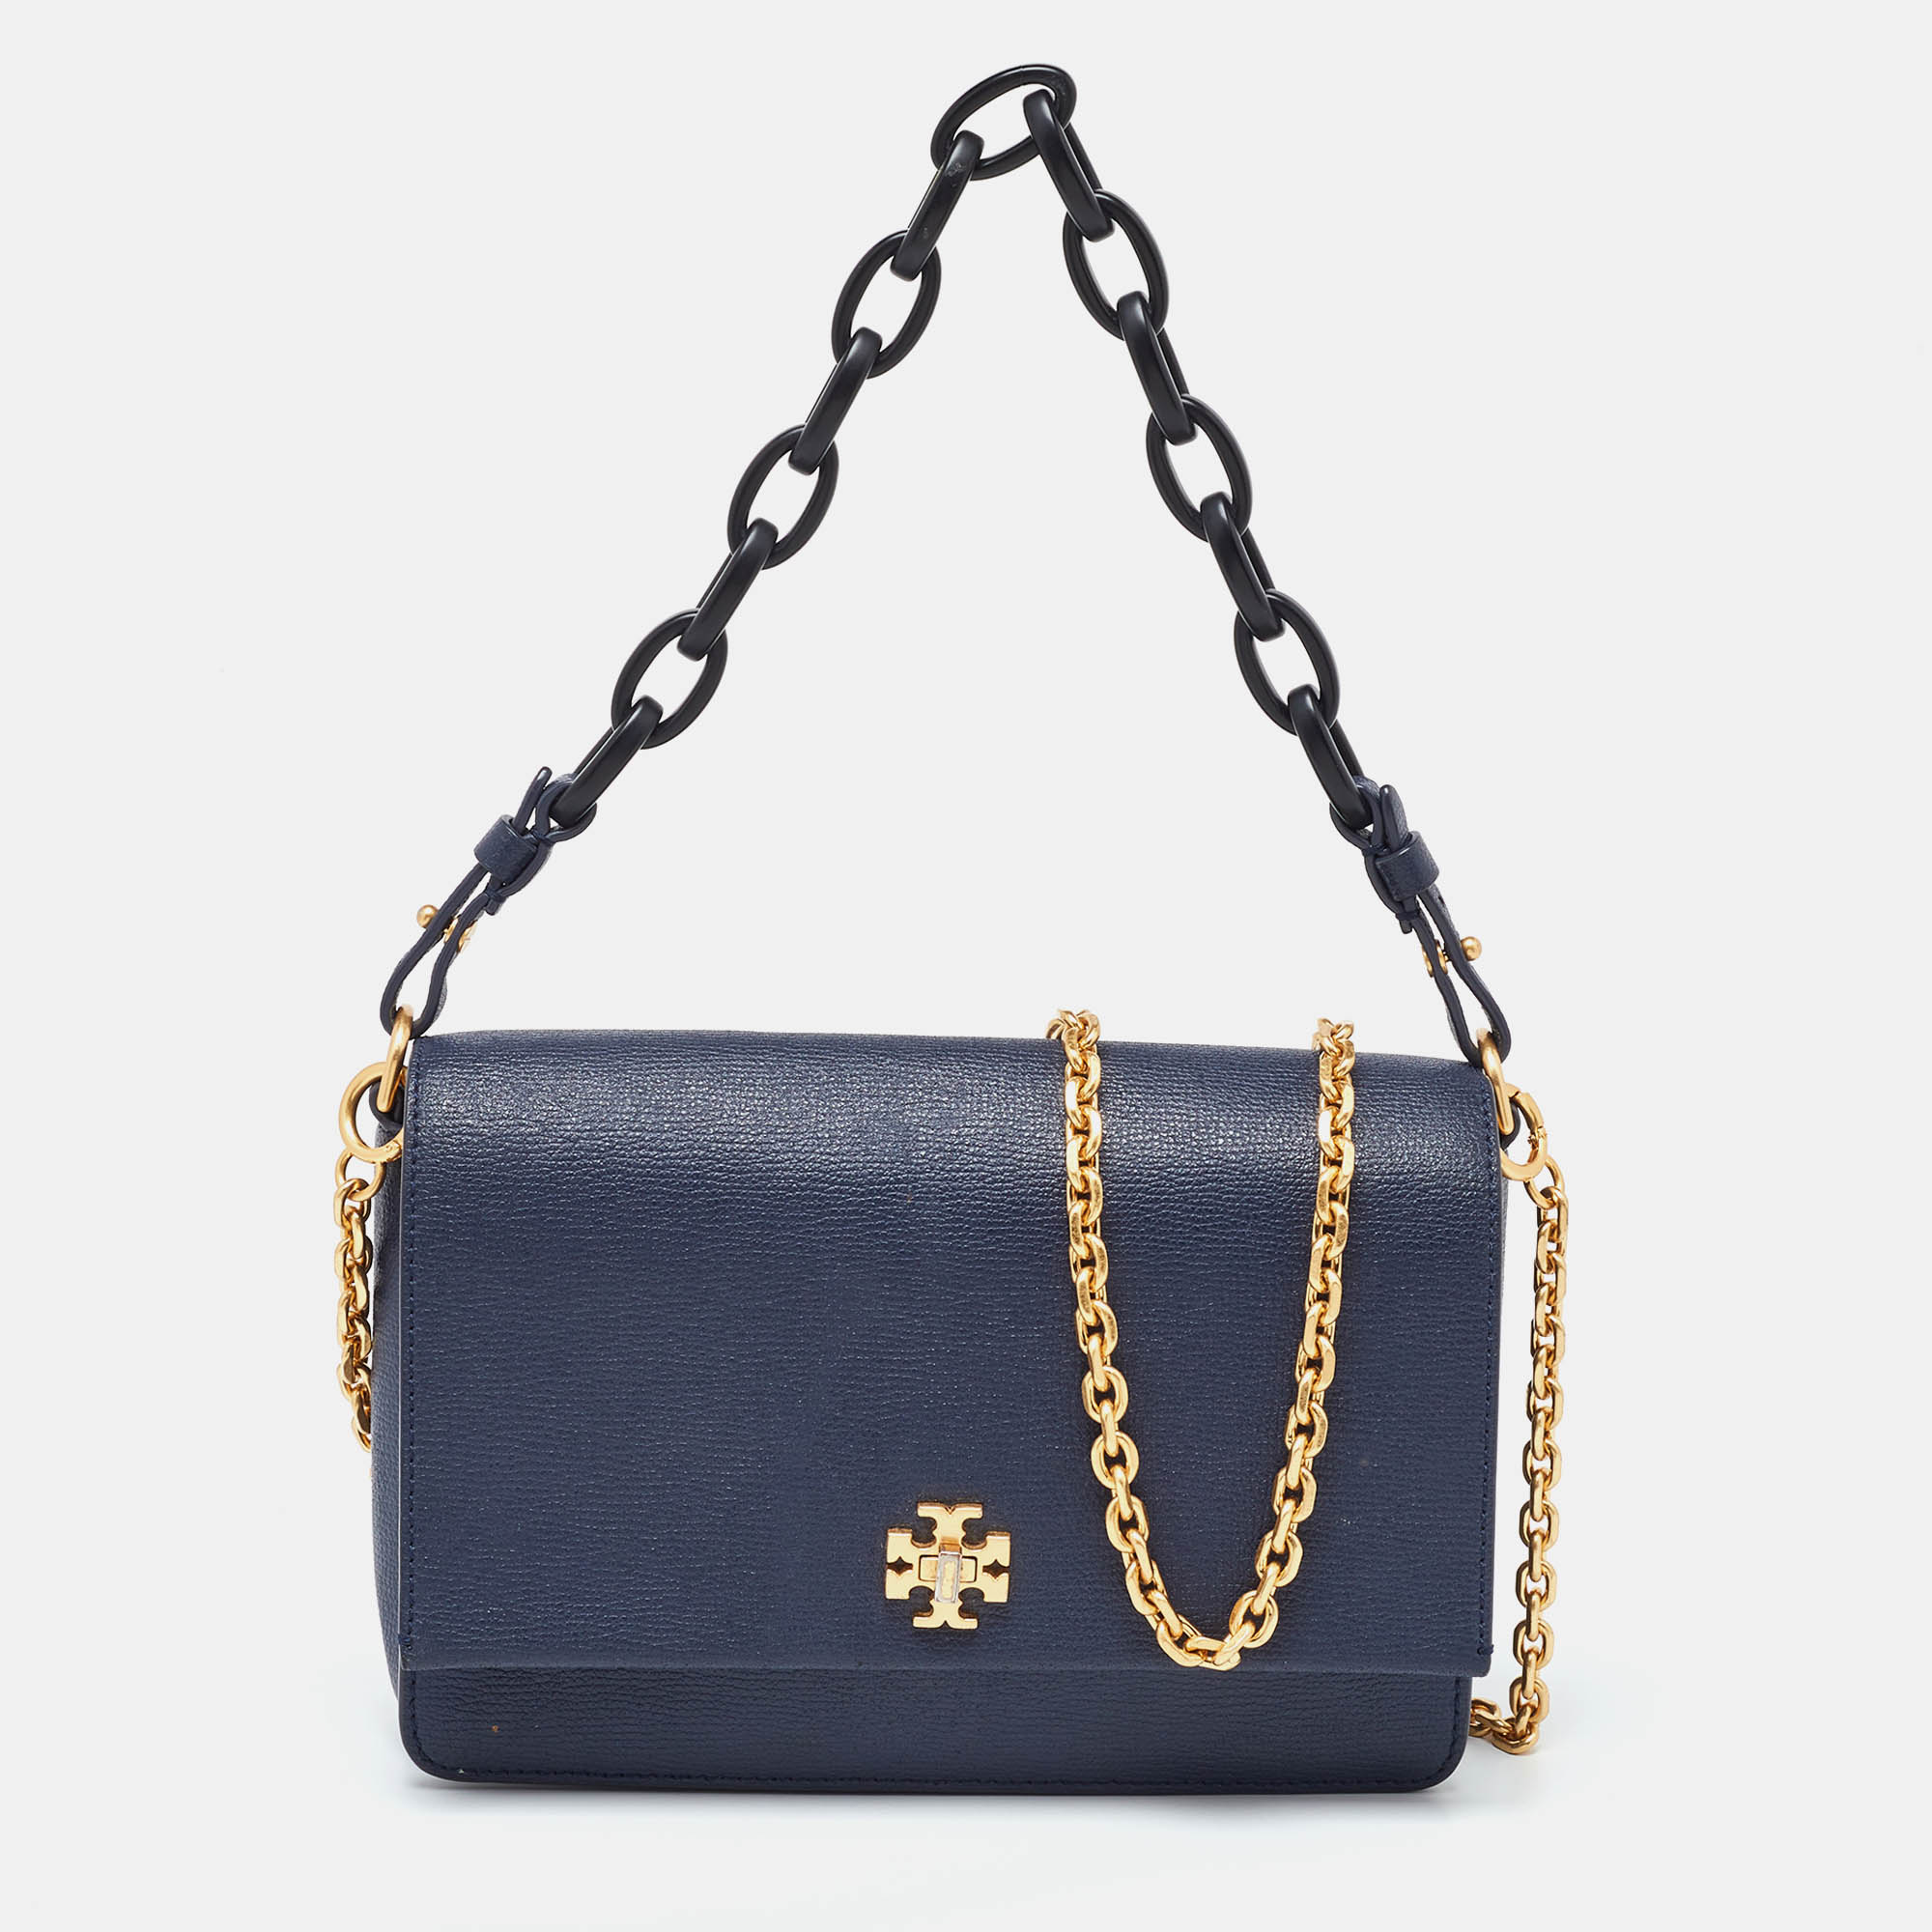 

Tory Burch Navy Blue Leather Kira Double Strap Bag